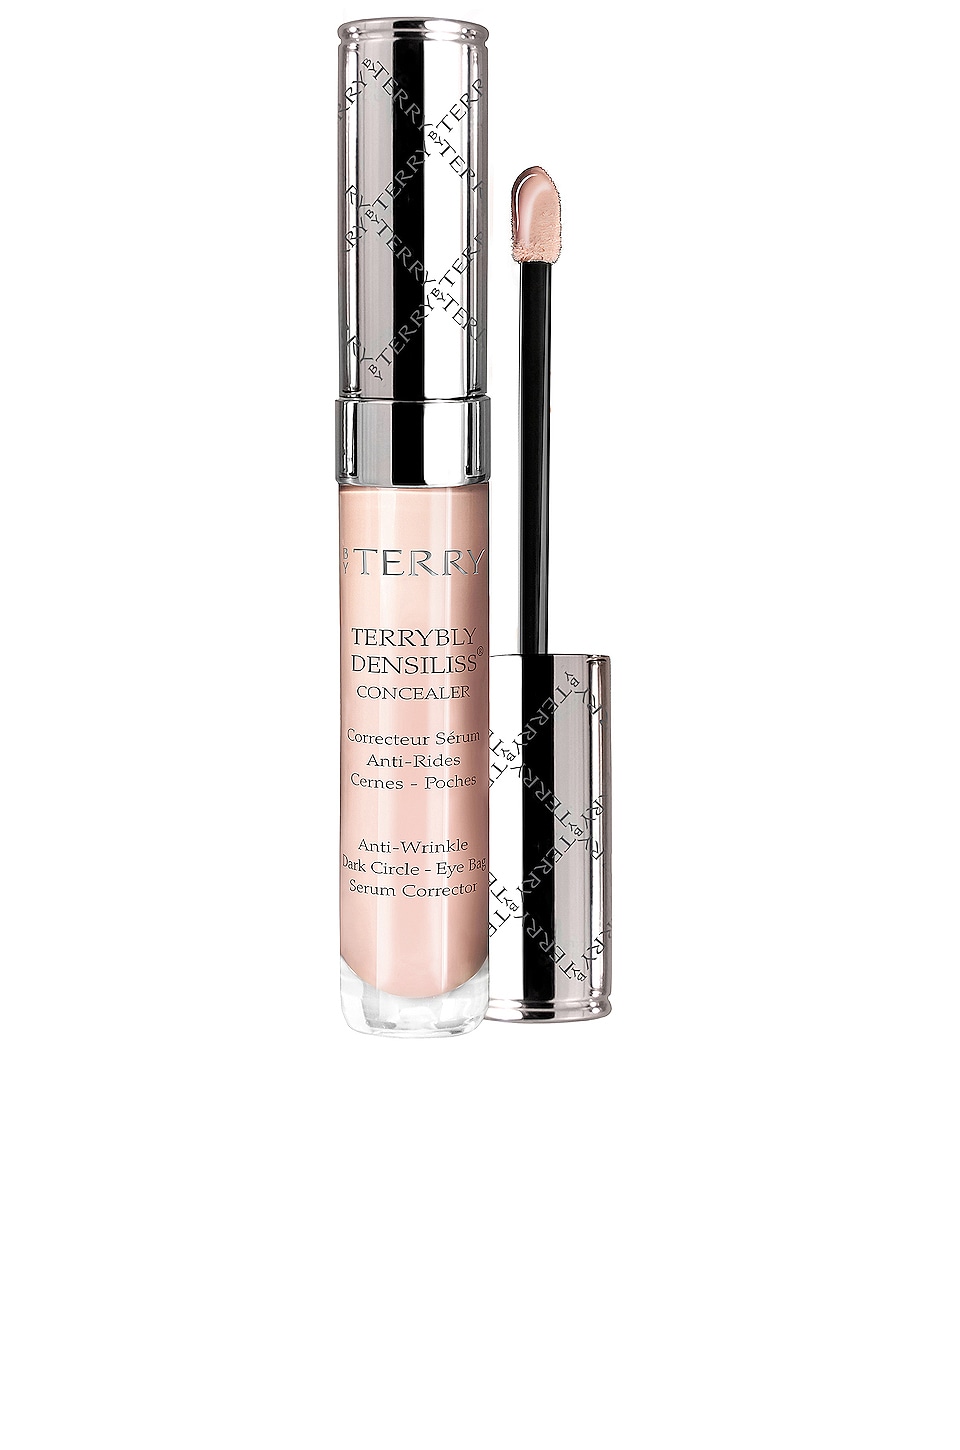 Консилер By Terry Terrybly Densiliss, цвет Medium Peach by terry консилер terrybly densiliss concealer оттенок 4 medium peach